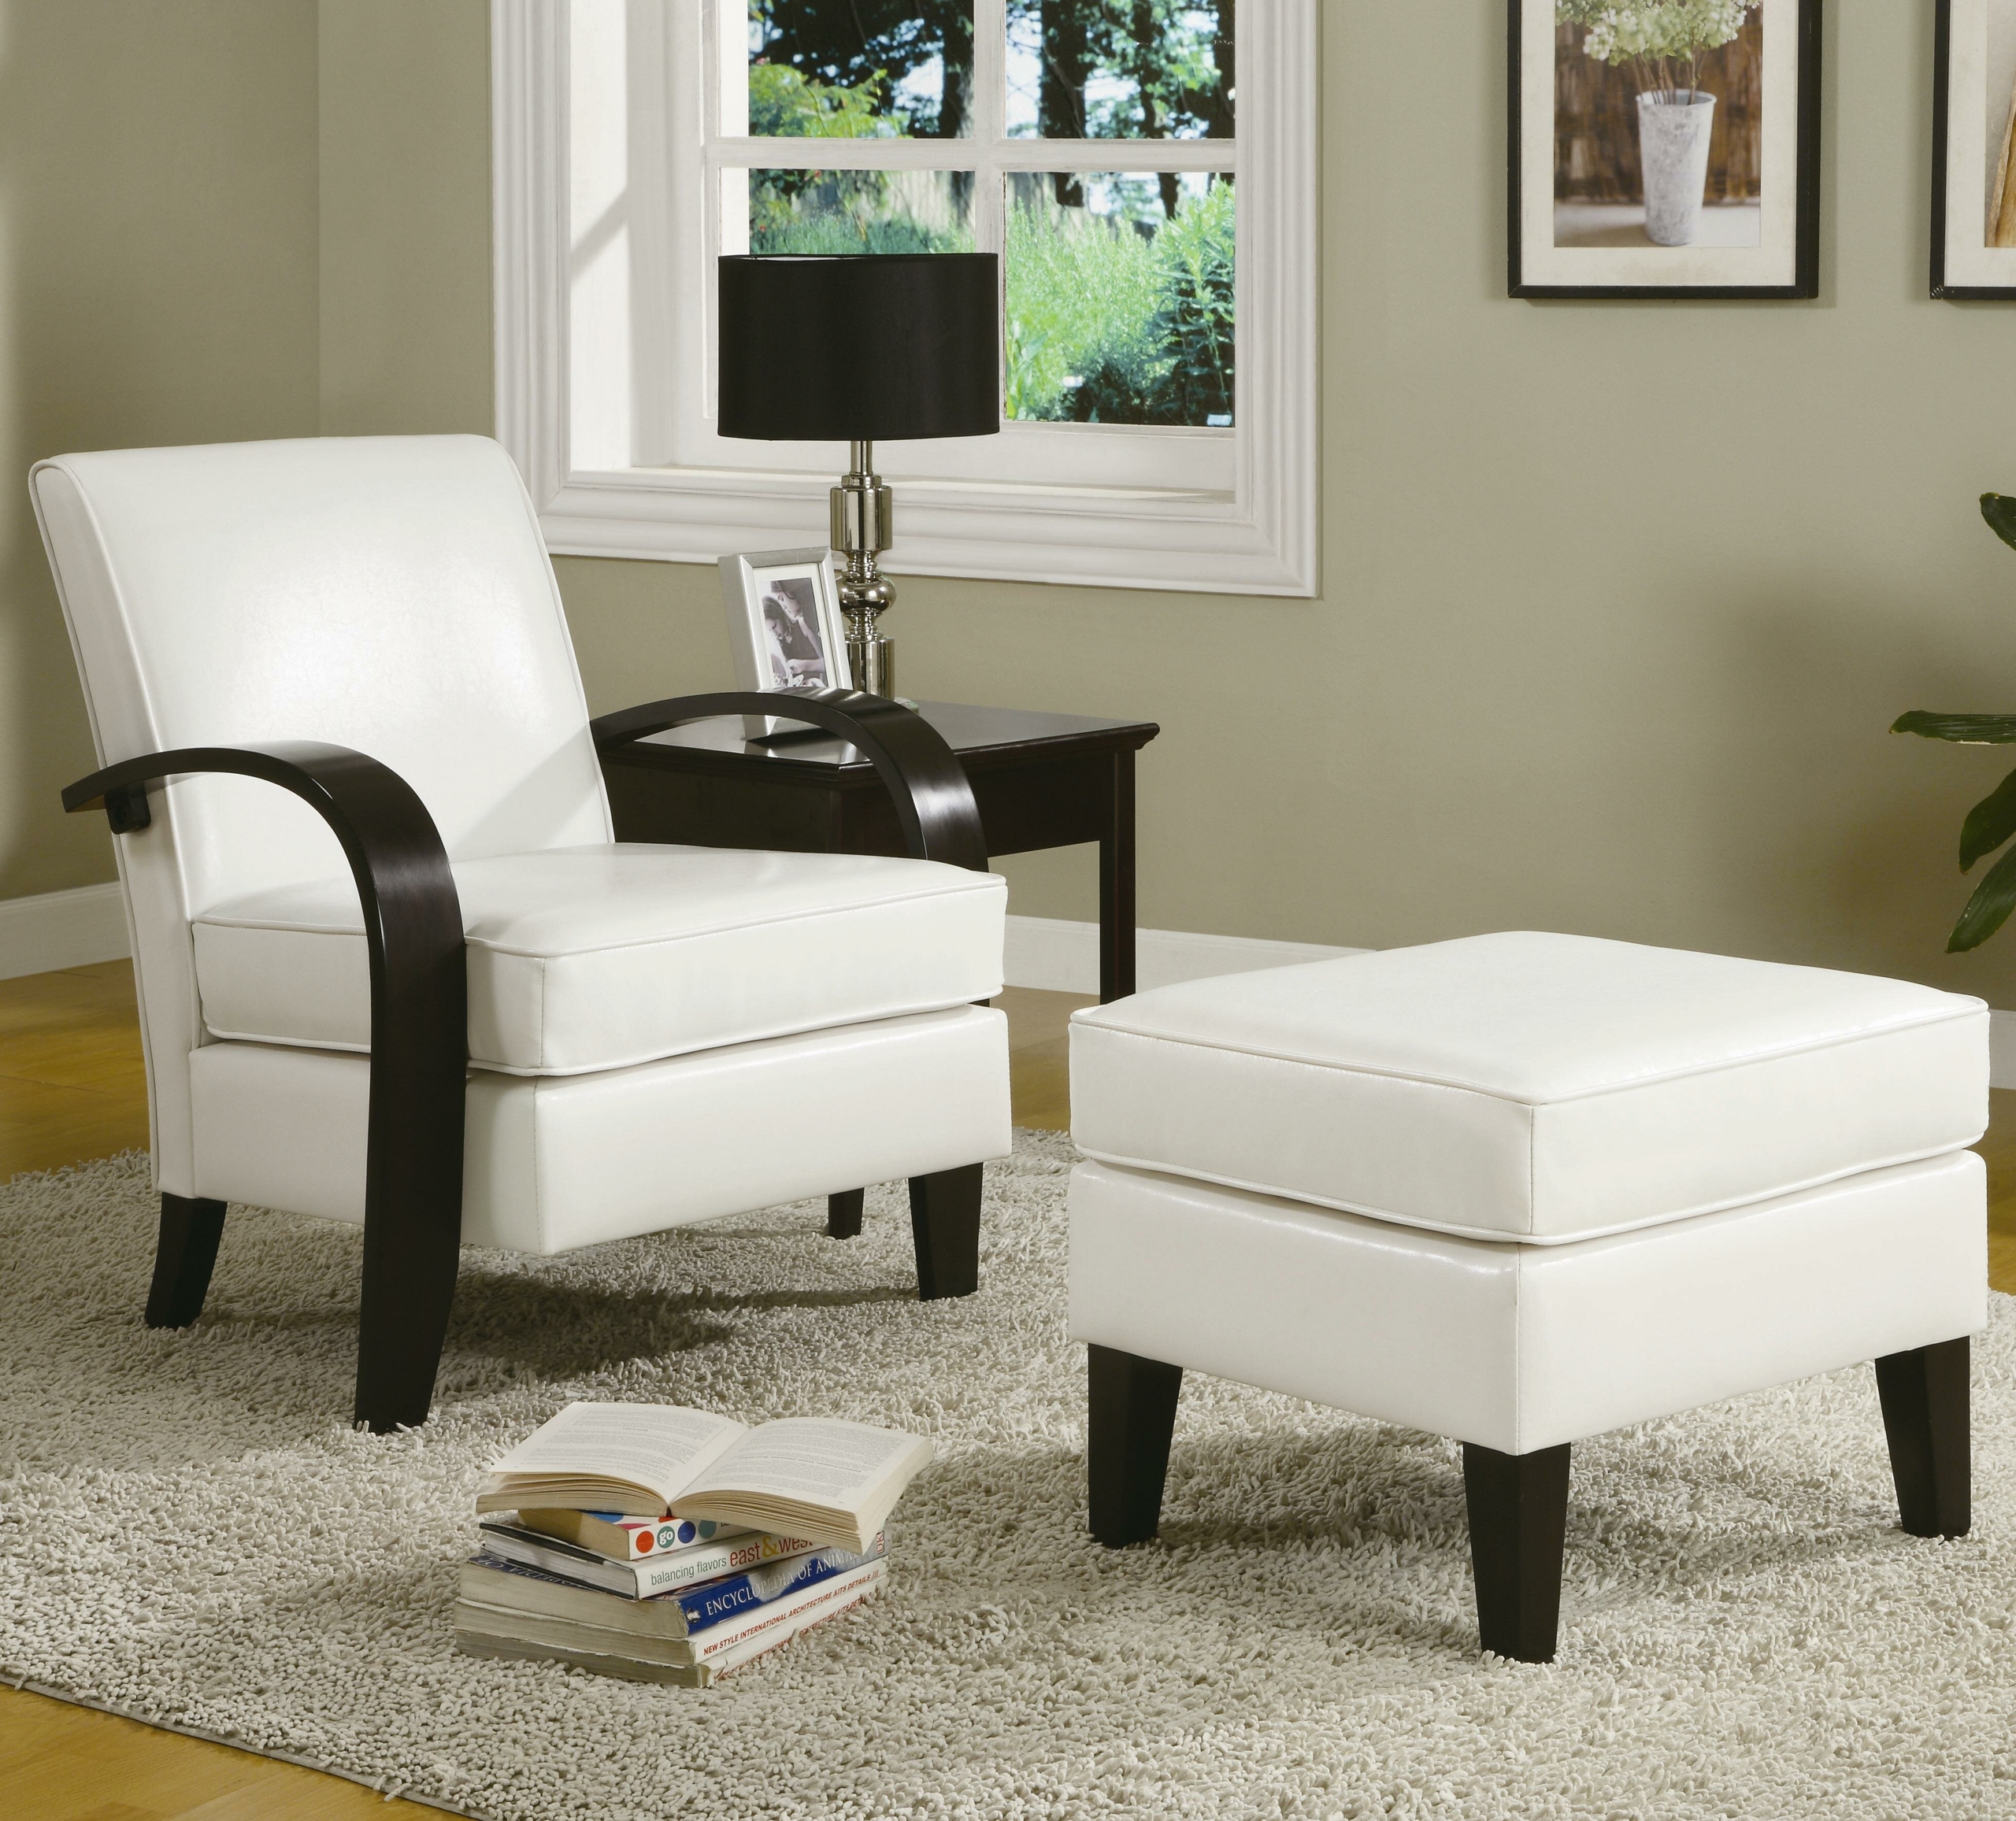 Small leather chairs with ottomans 17